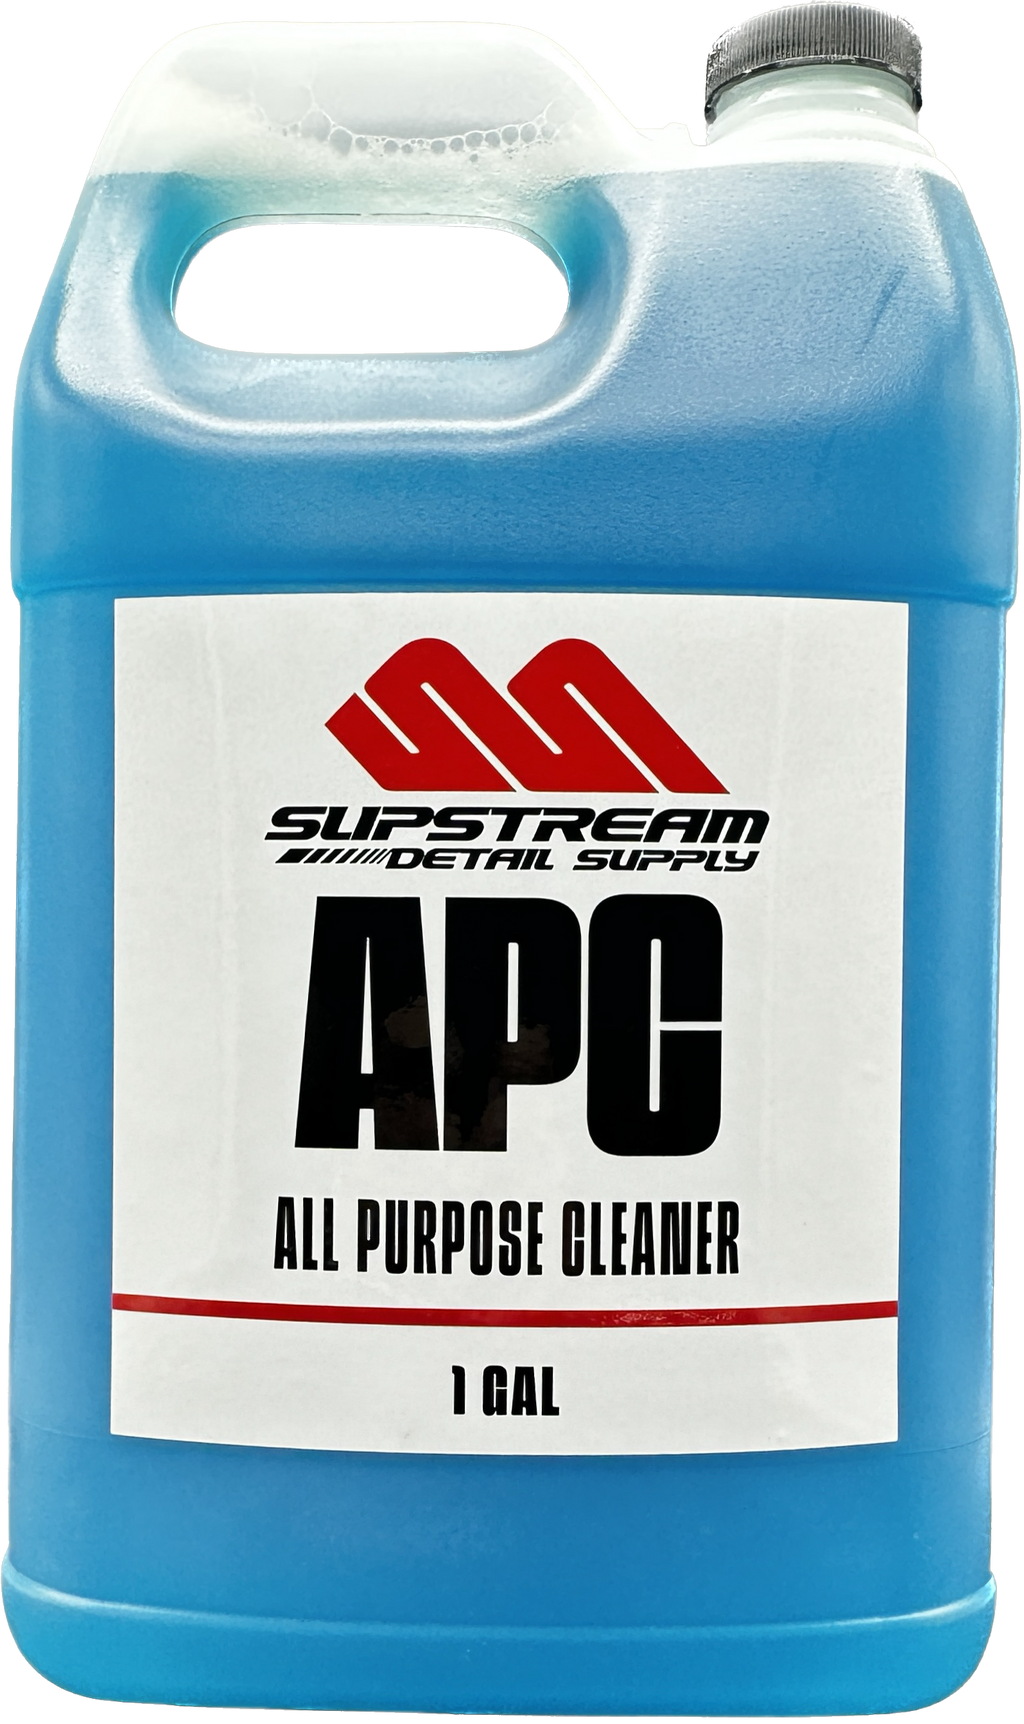 The Cleaner Interior and Exterior All Purpose Cleaner for Cars | Citrus Formula to Eliminates Dirt, Oil, Grease, and Grime 16oz